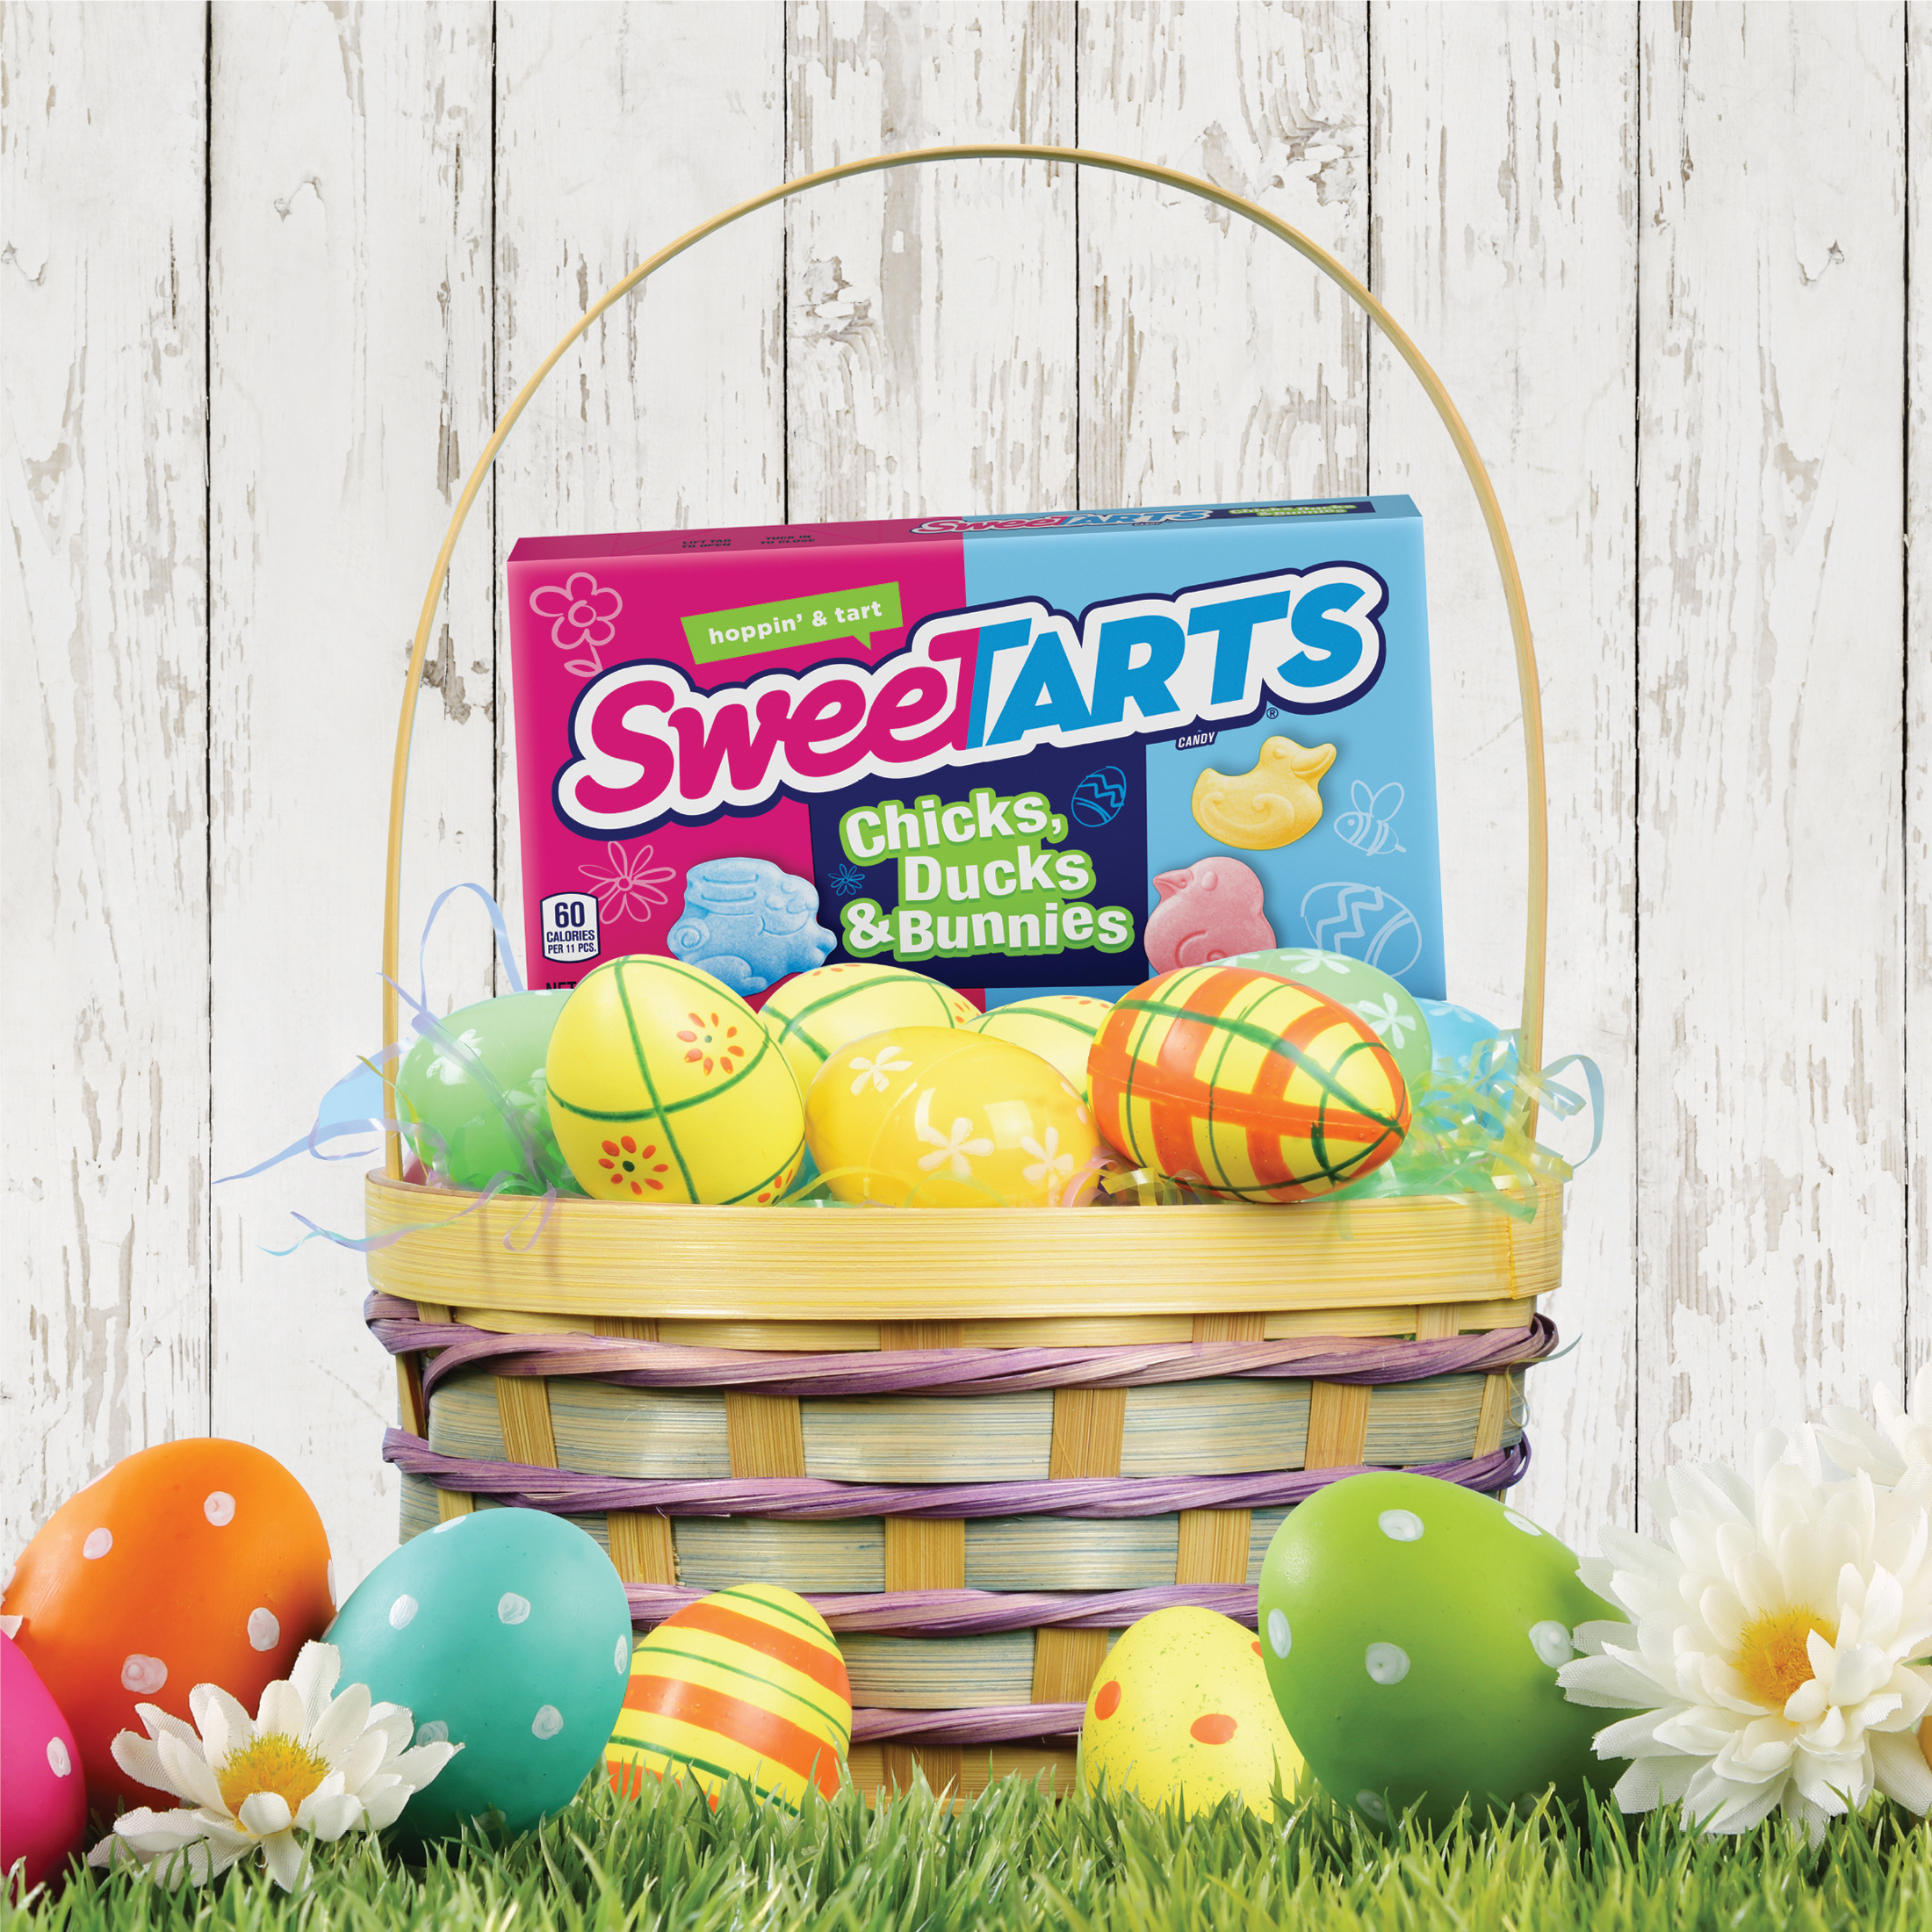 SweeTARTS Chicks, Ducks, & Bunnies Easter Candy, 4.5 oz, Theater Box - image 3 of 7